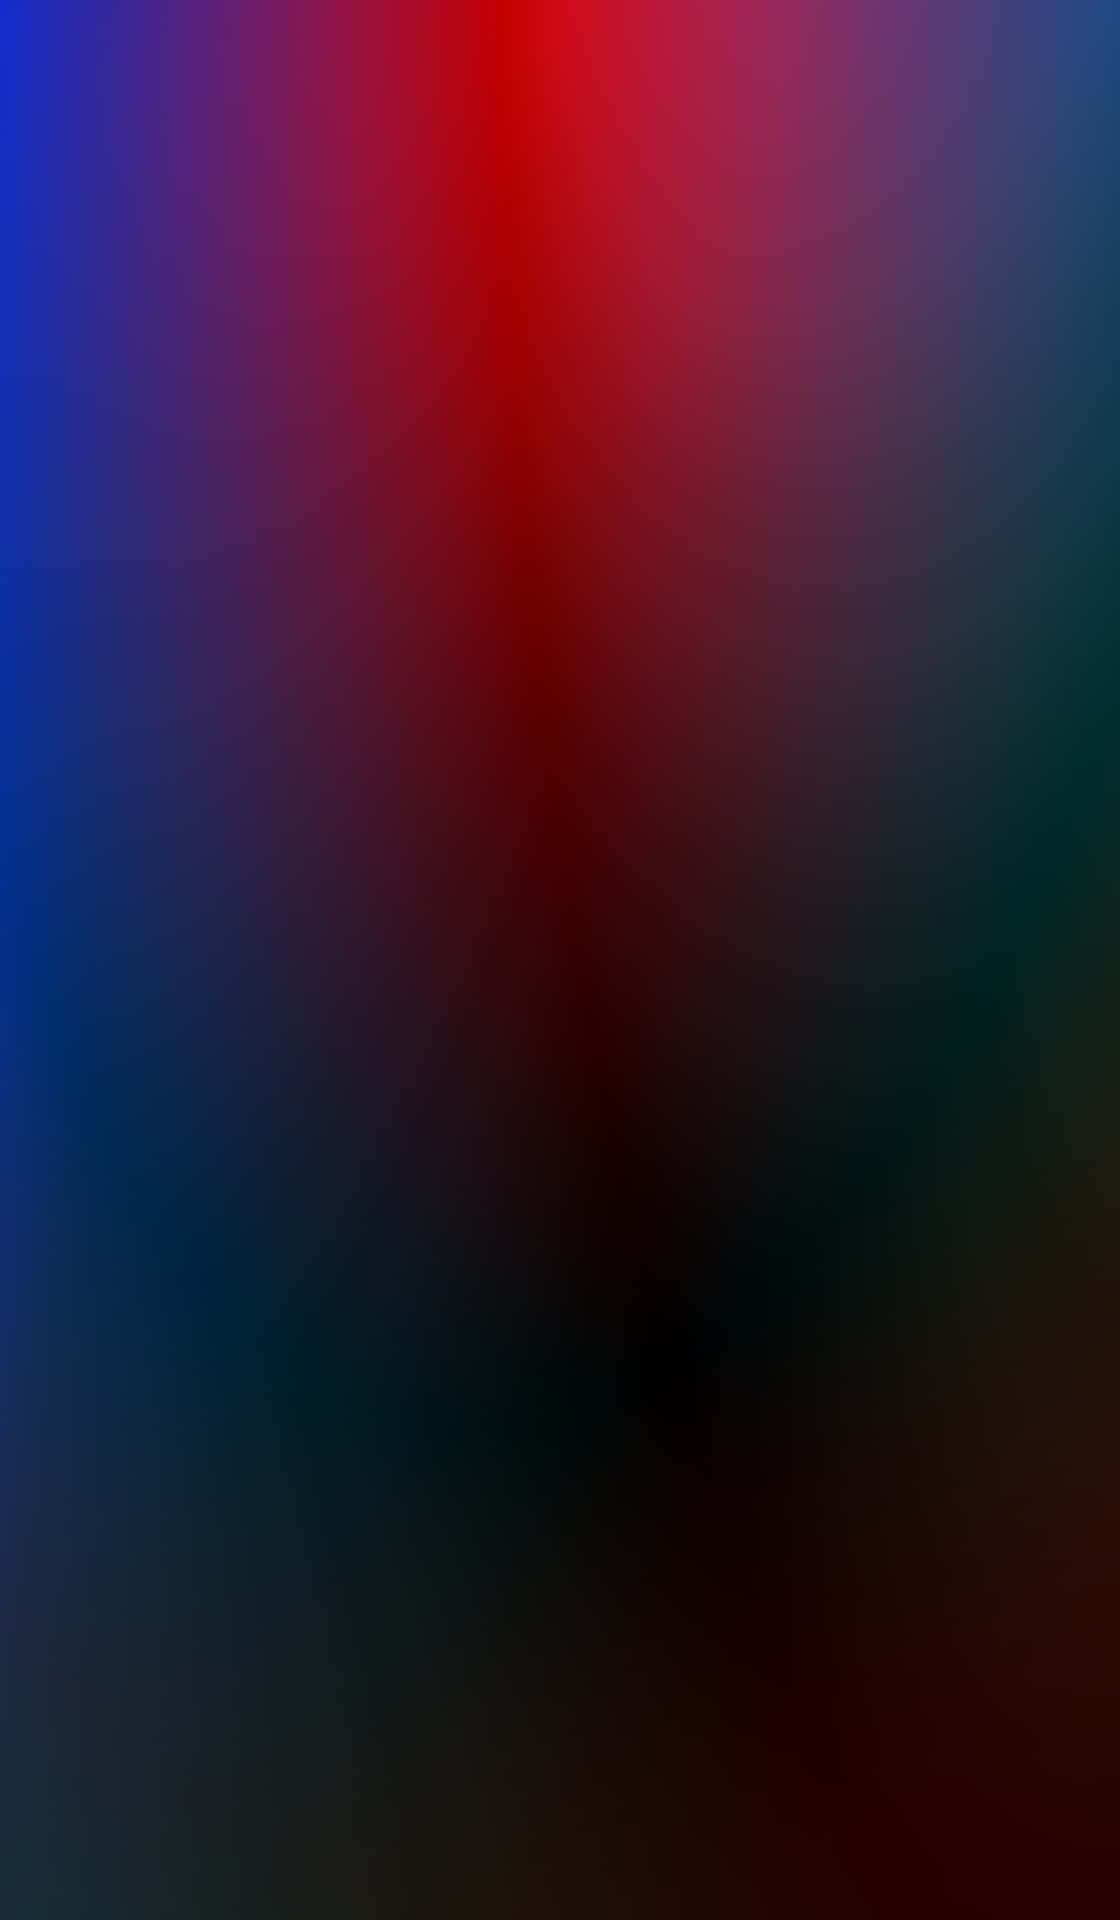 Blue And Red Vector Art Background